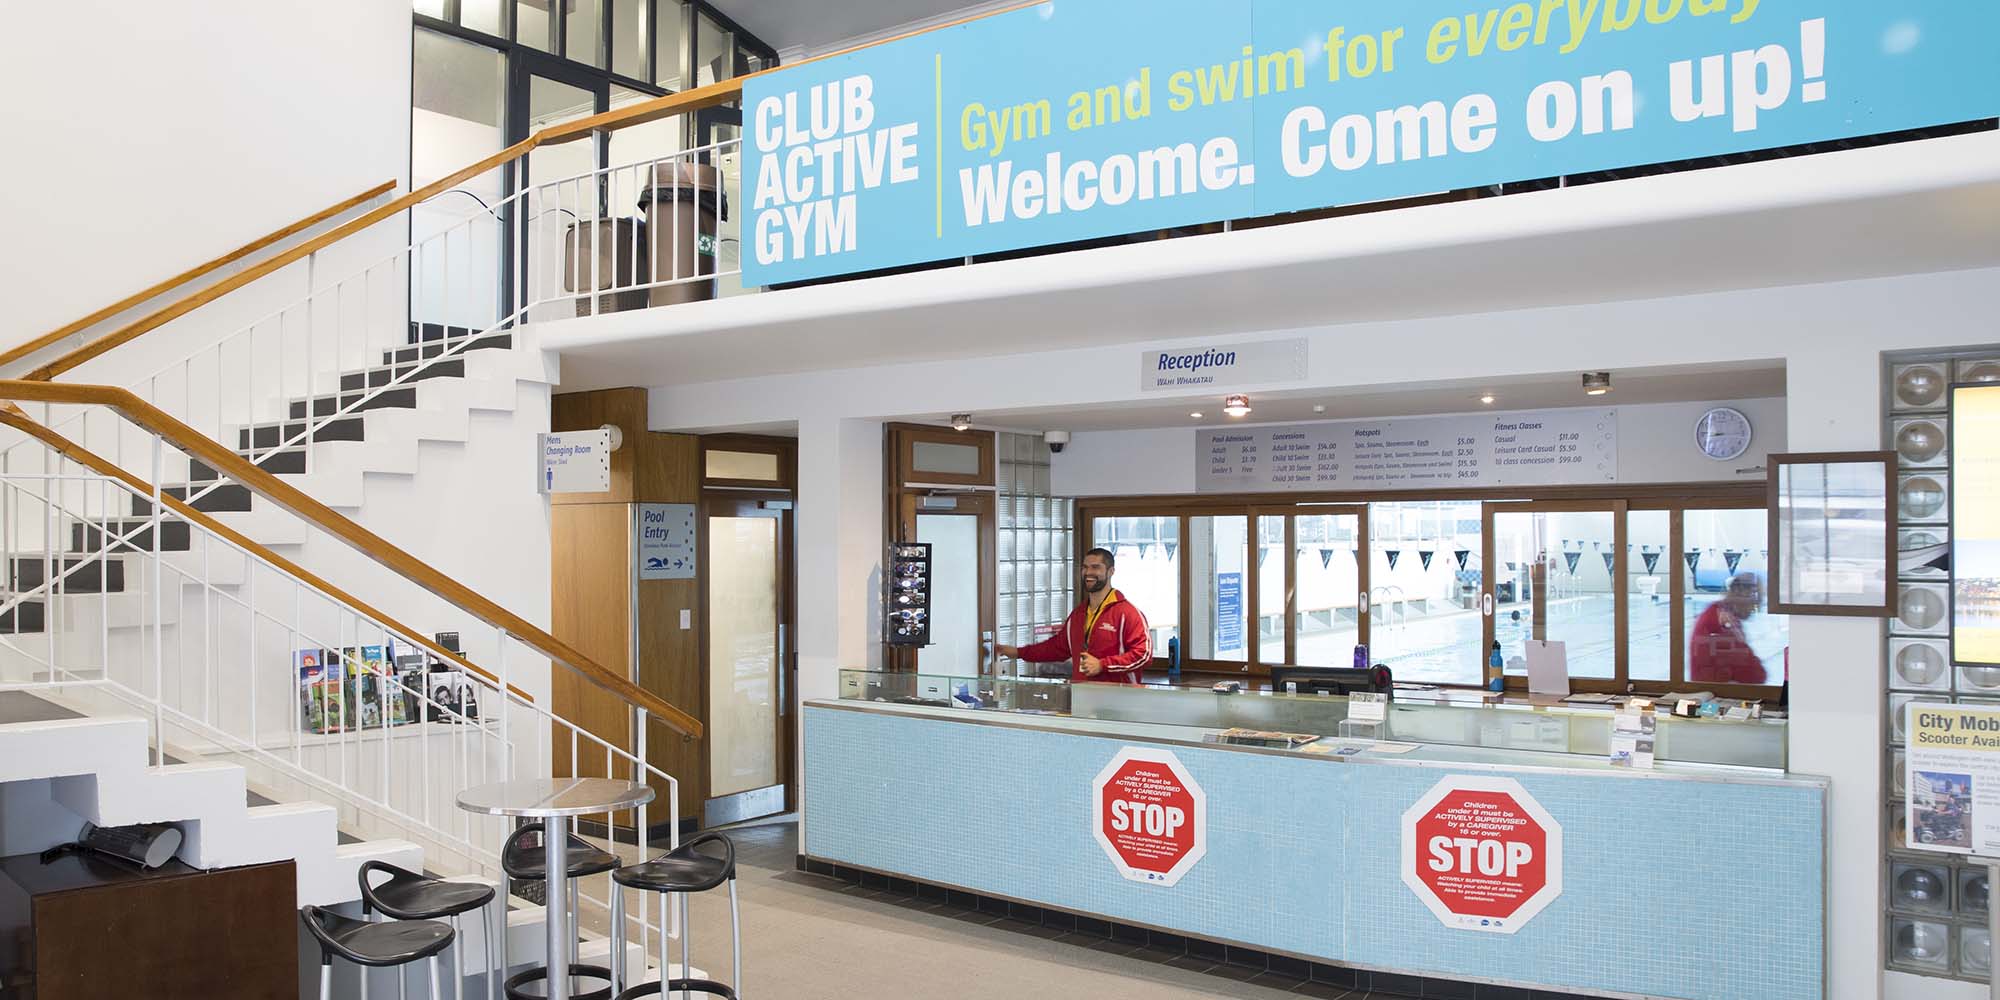 Reception area at Freyberg Pool & Fitness Centre.